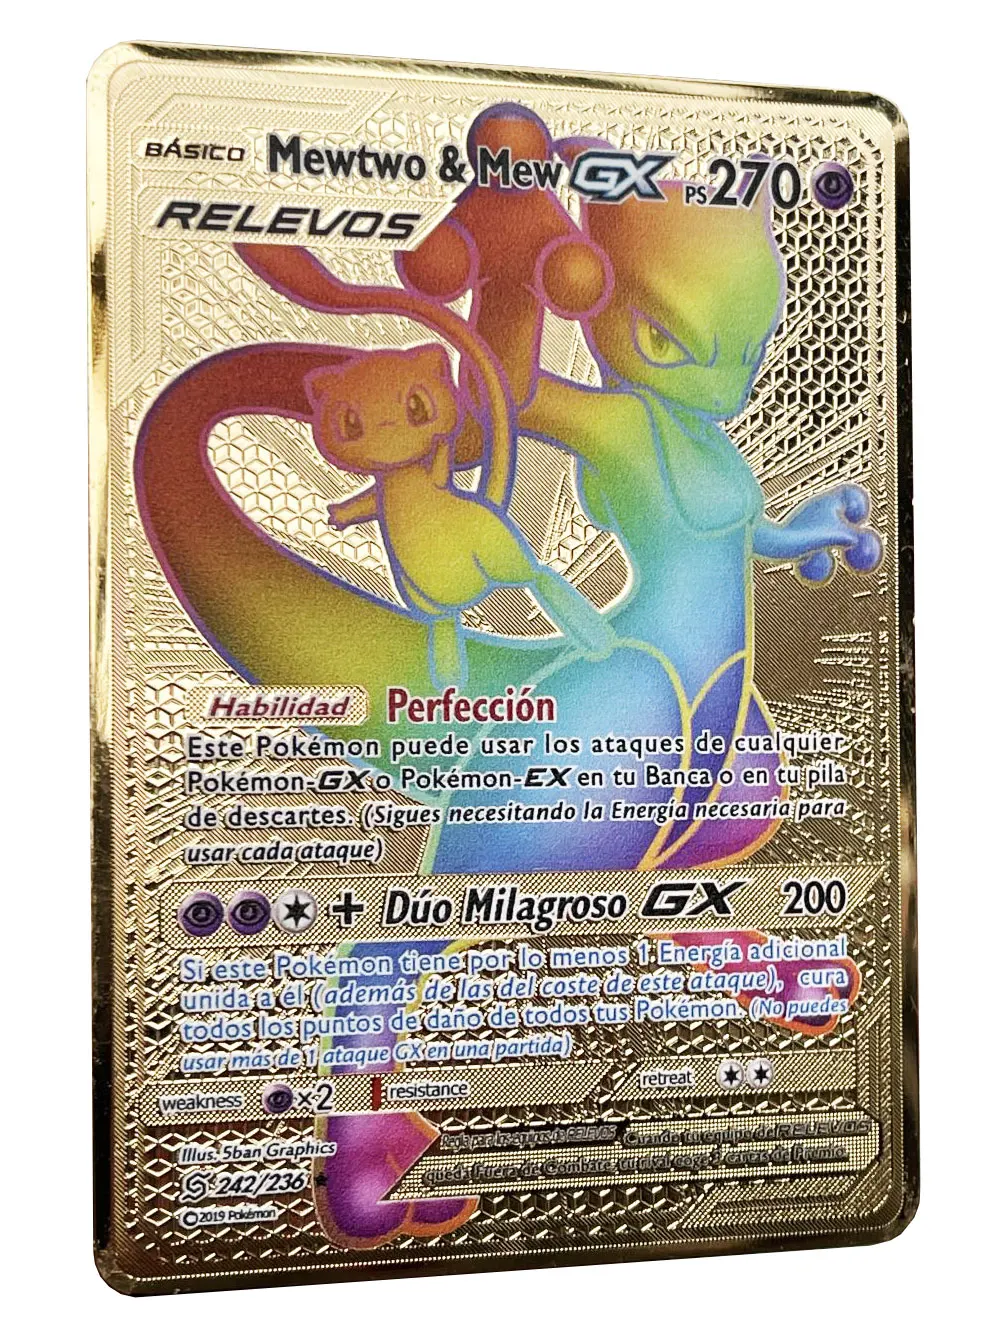 12 Pcs Metal Charizard Cards Vmax GX Series Rainbow Rare Gold Plated Cards for Game Fan/Collectors/Kid Tehfgog Charizard Pokemon Cards 